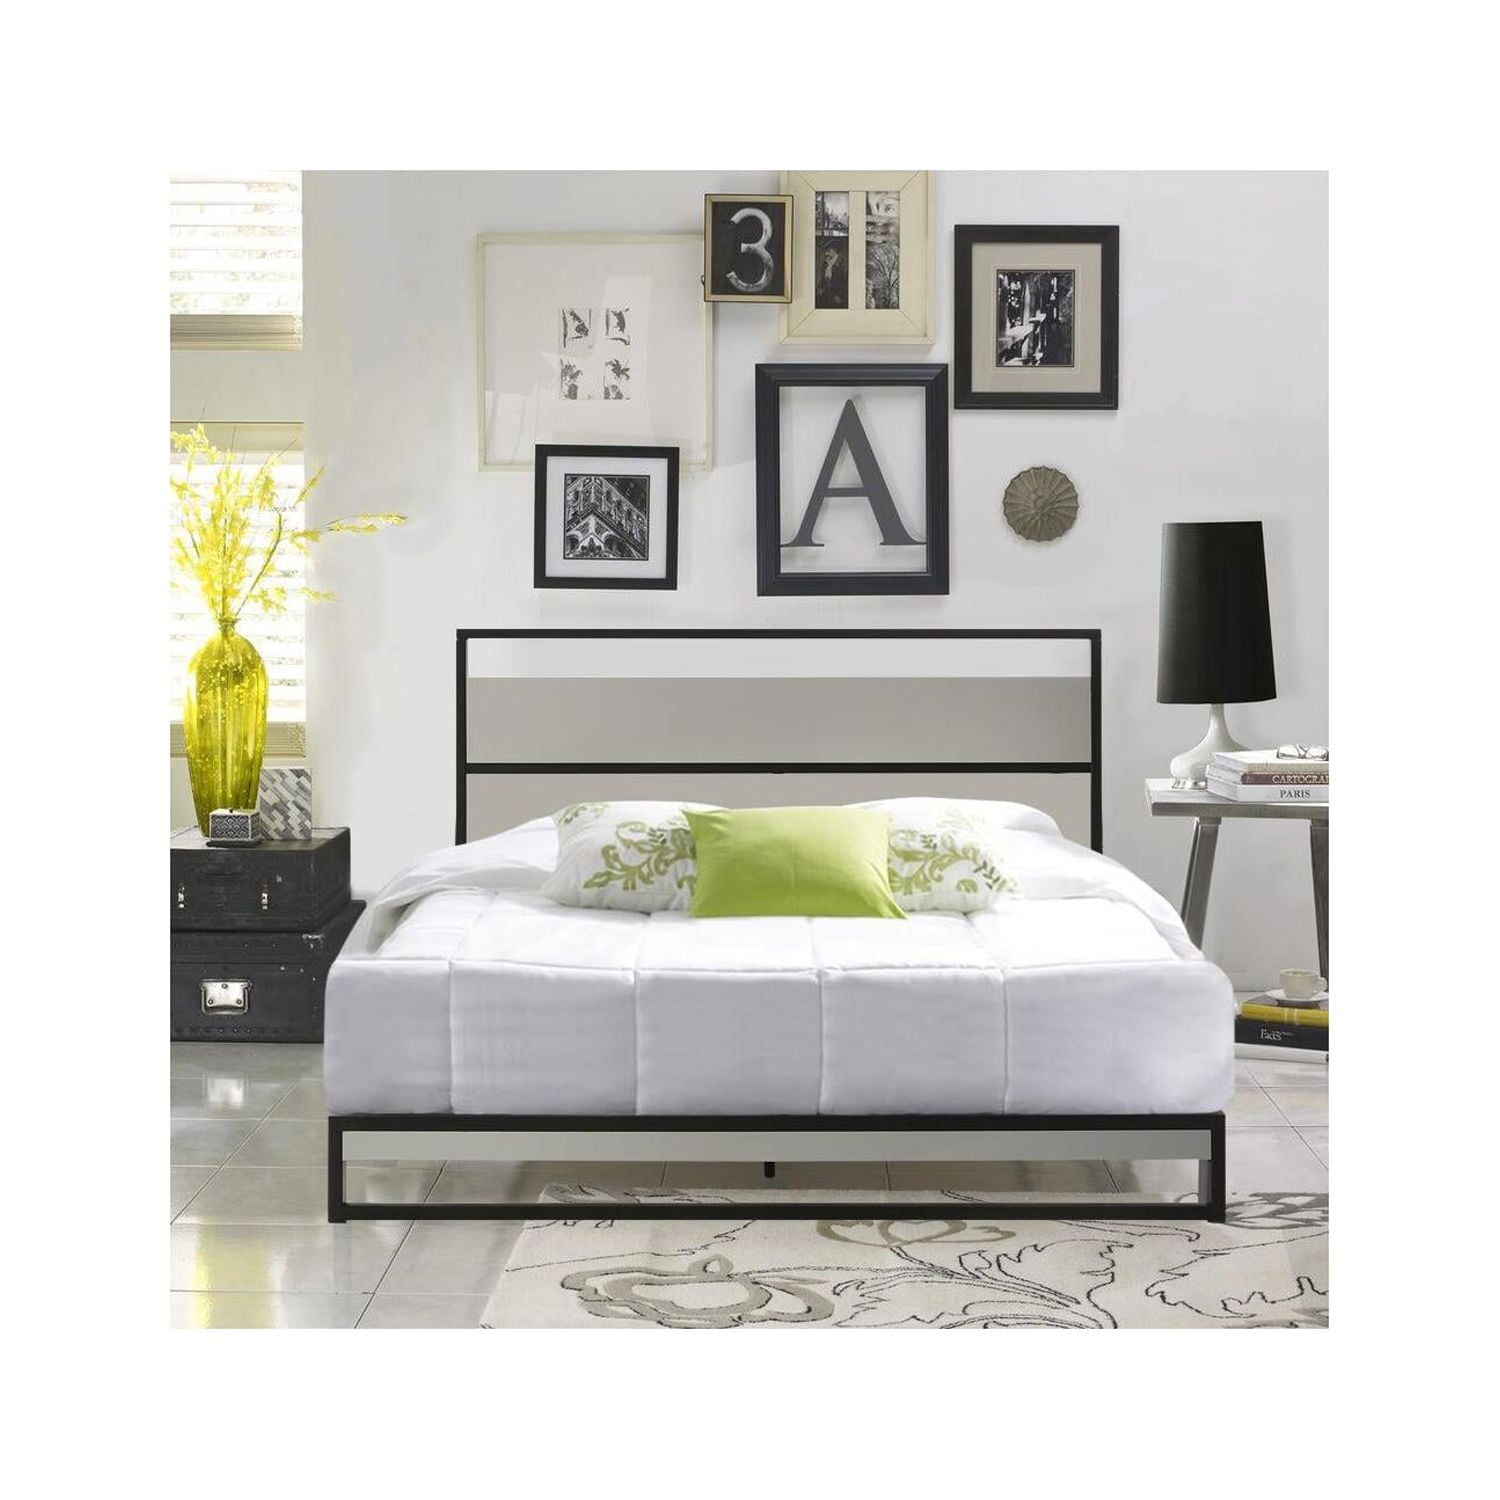 Picture of Belle Isle Furniture CEH58-1009 Eagle Harbor King Size Bed - Black & Grey